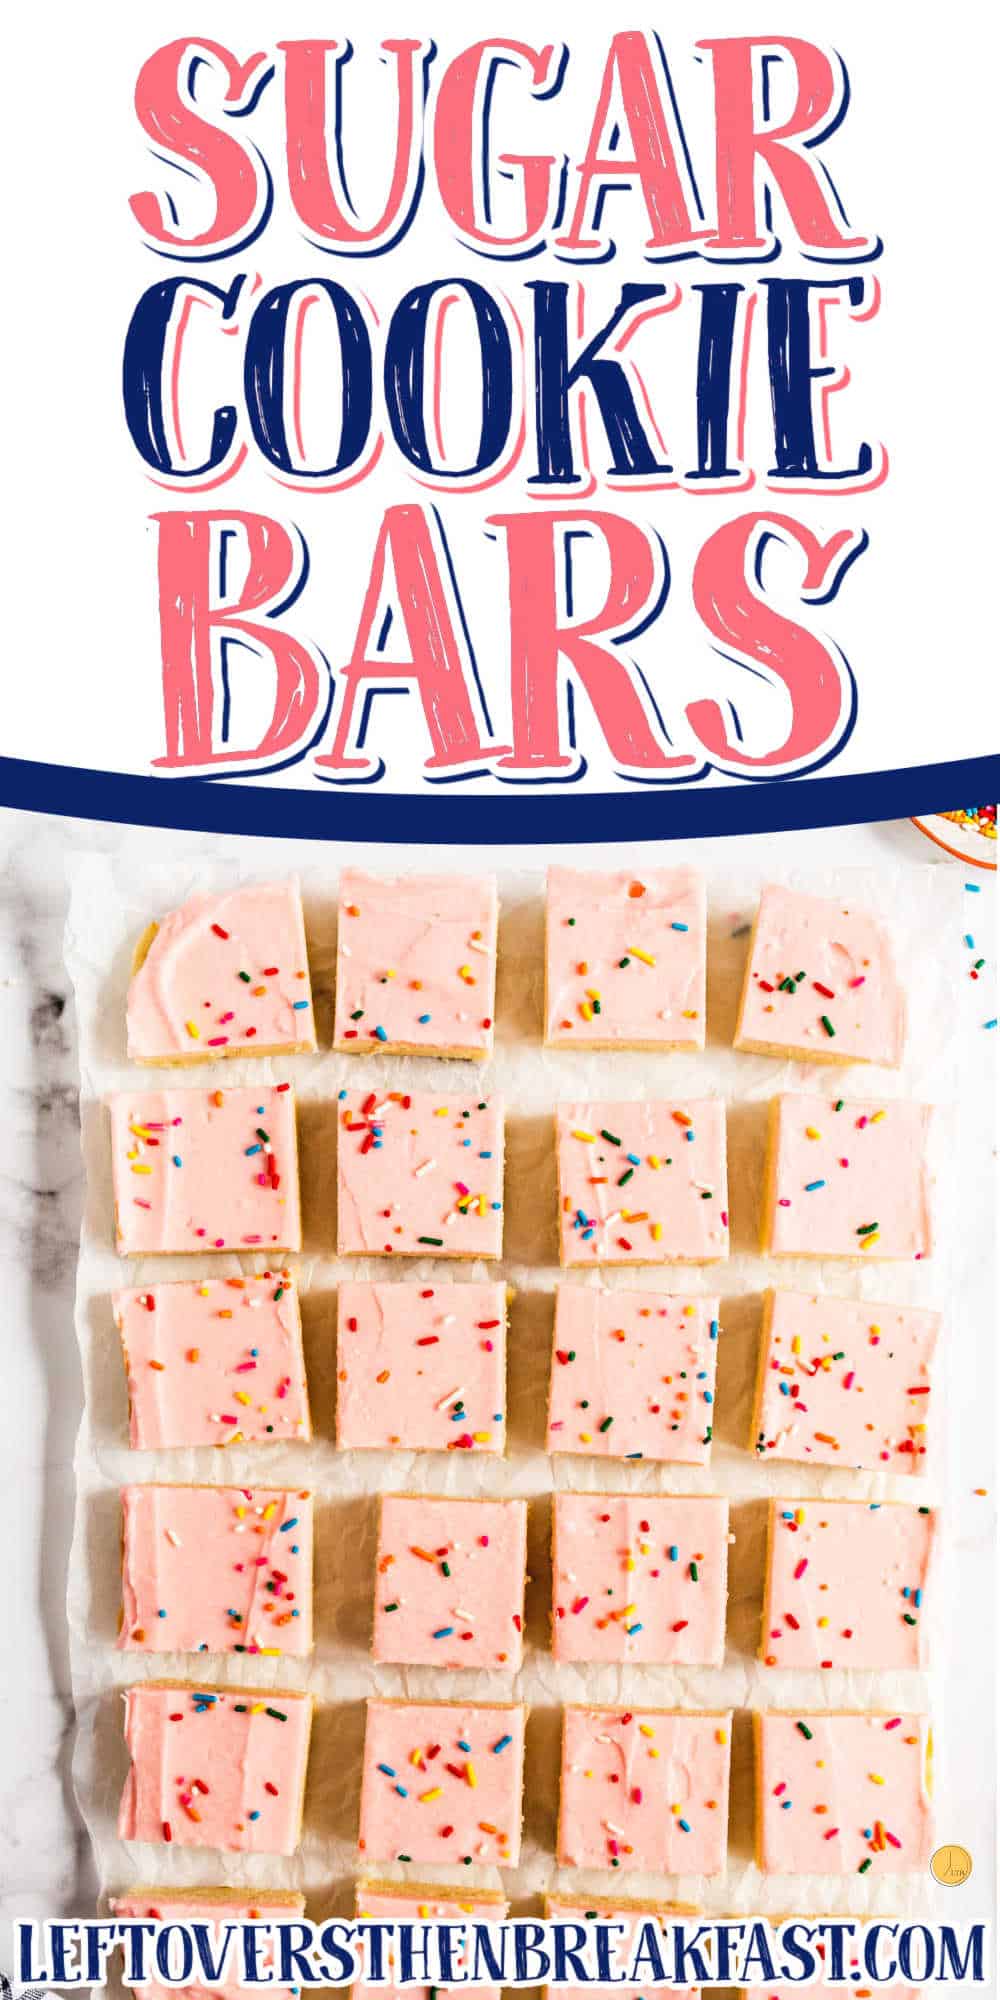 cut cookie bars with text "sugar cookie bars"